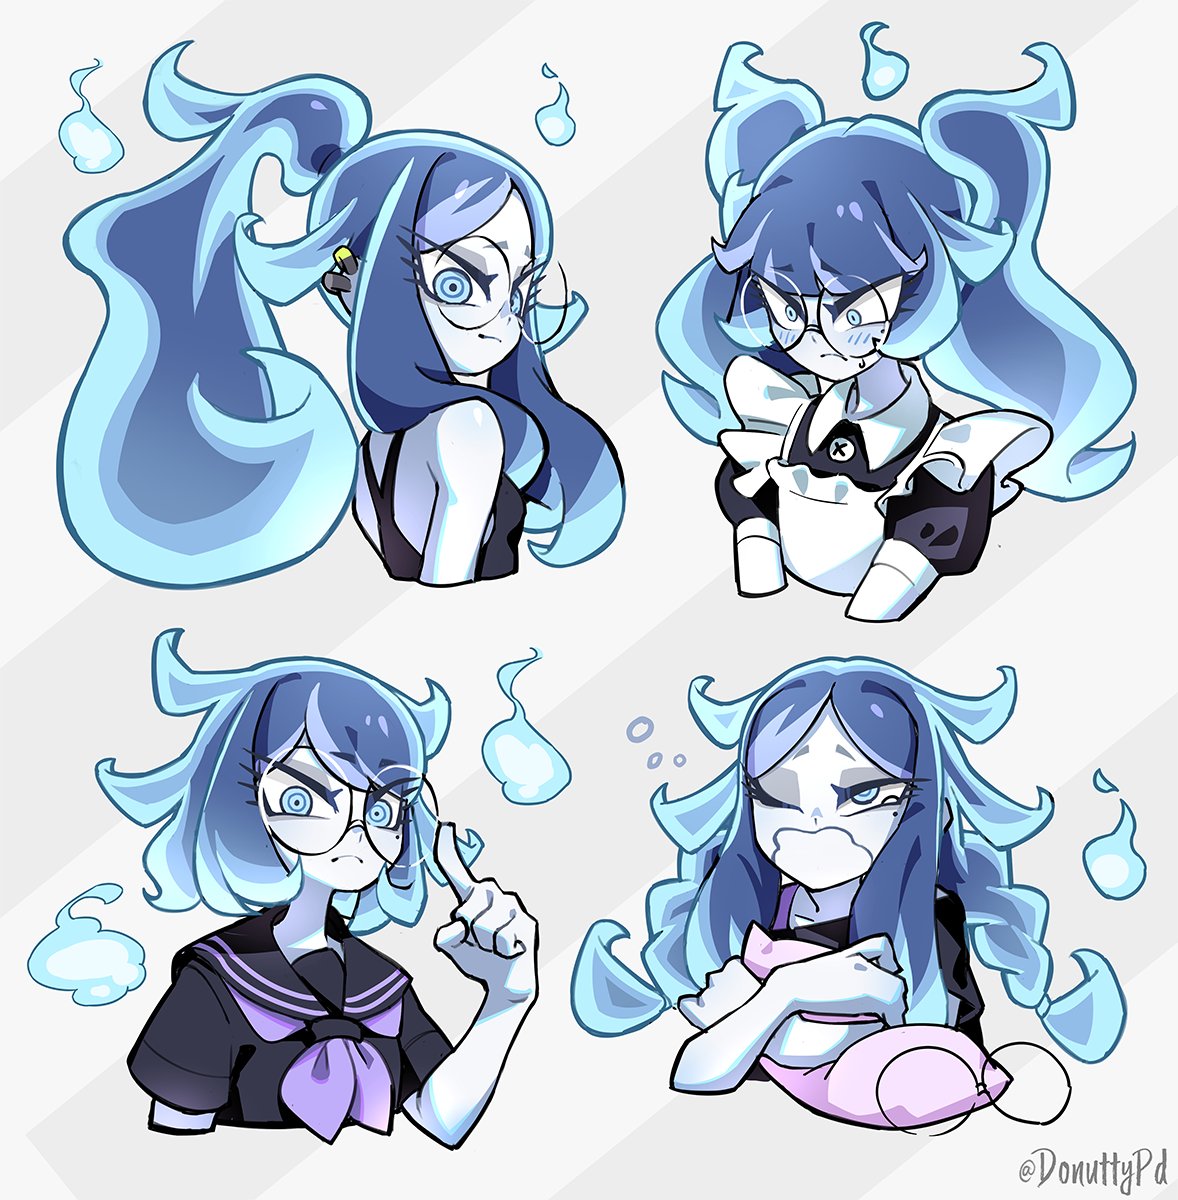 「Ghost girl with various hairstyles
#orig」|ピーディー🍩PDのイラスト